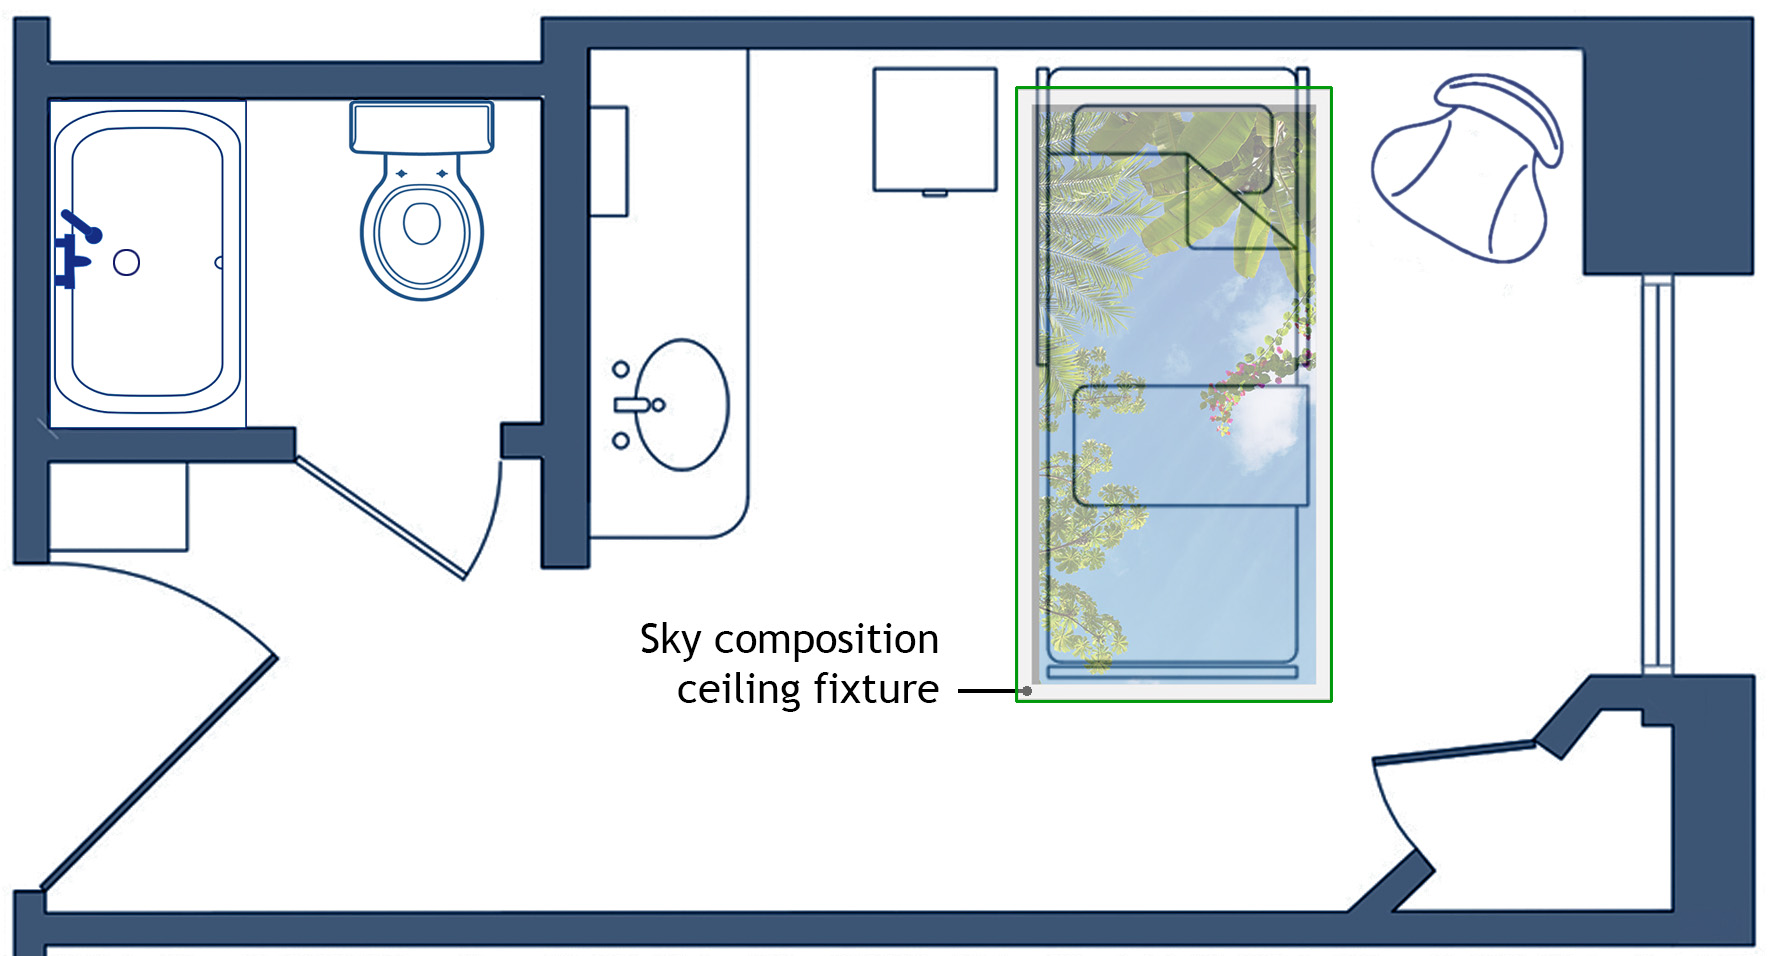 Luminous SkyCeiling over the patient bed. Diagram courtesy of Texas Tech University’s Dept. of Design.